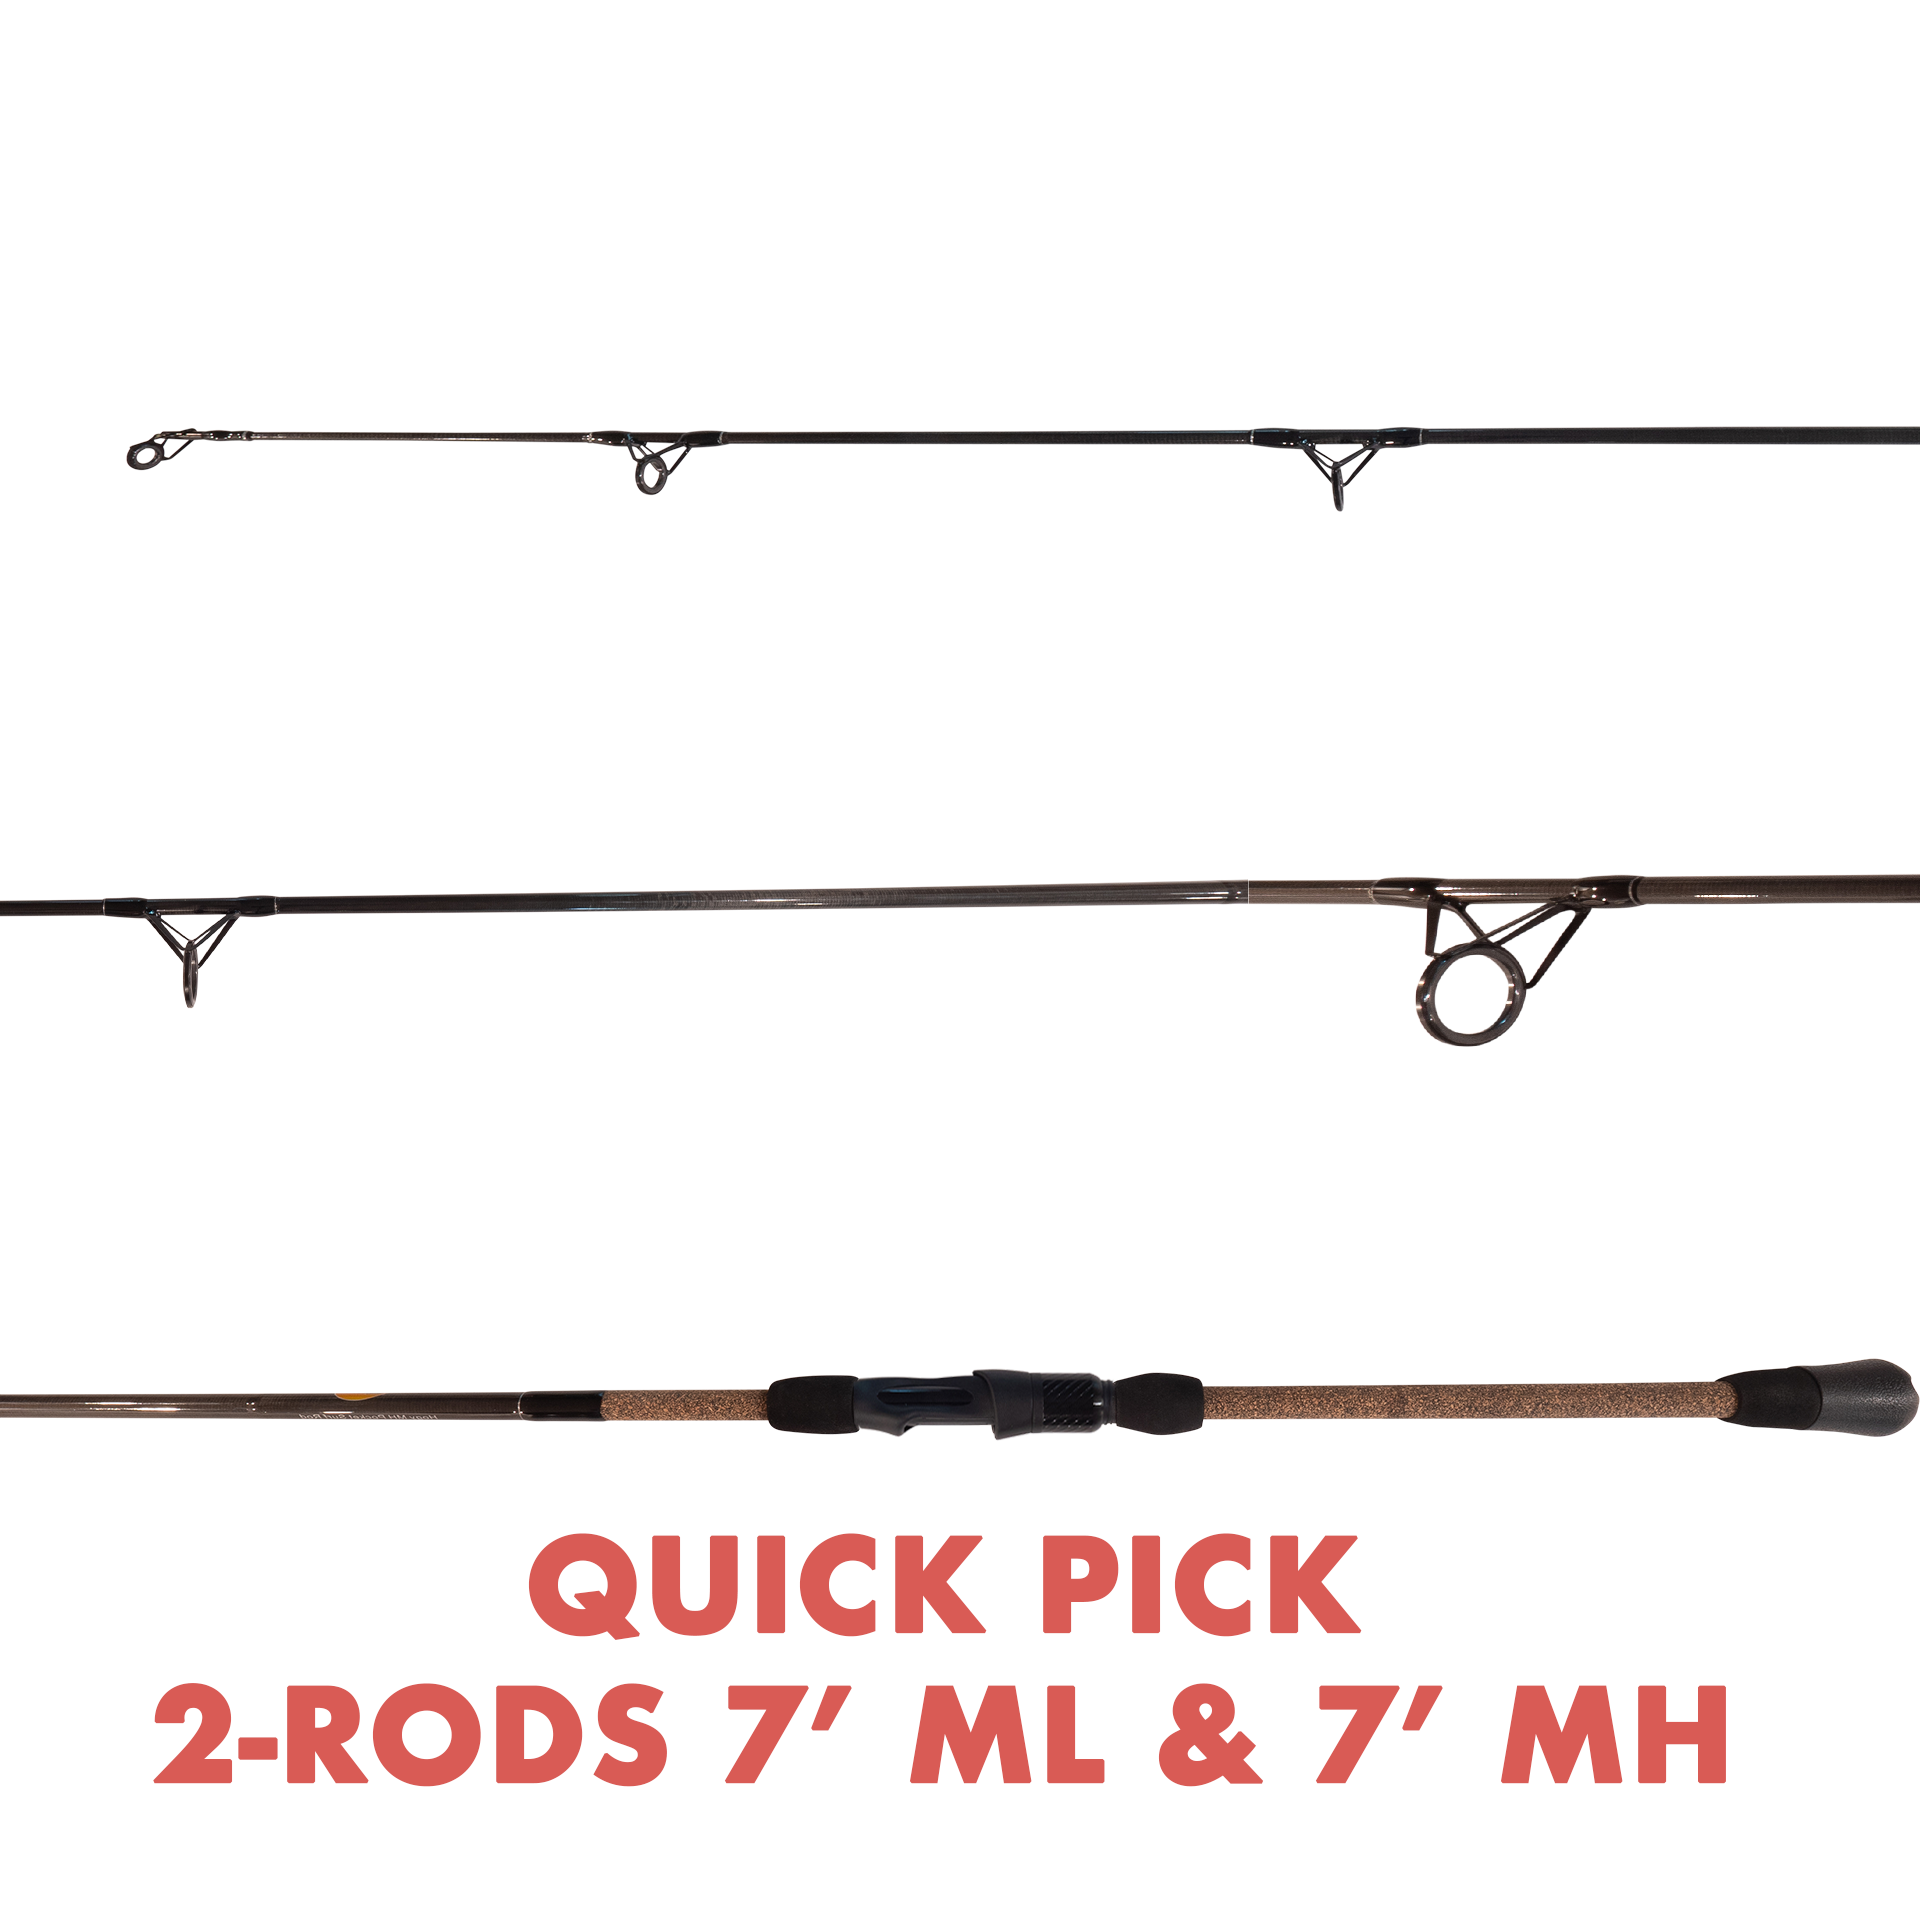 FTO Pre-Order Special: QUICK PICK Pocket Surf Rod: 1 Each 7' ML & 7' MH (Ship Date By 5/15)